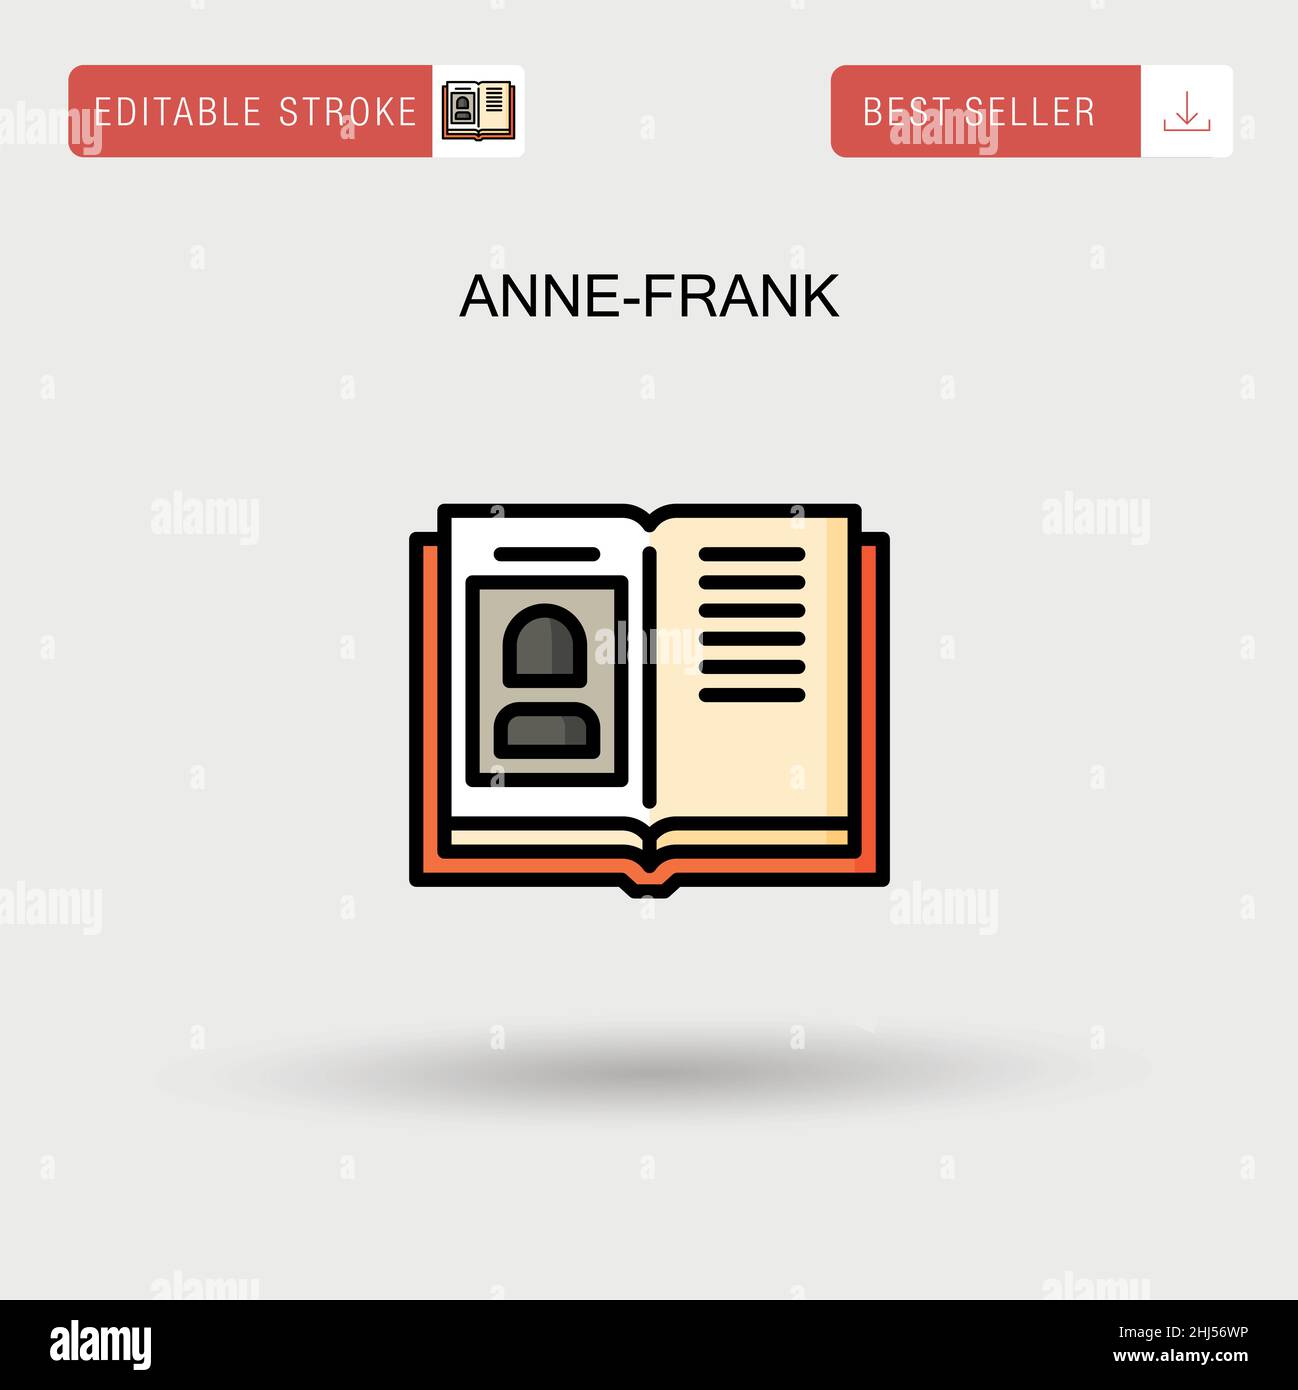 Anne-frank Simple vector icon. Stock Vector